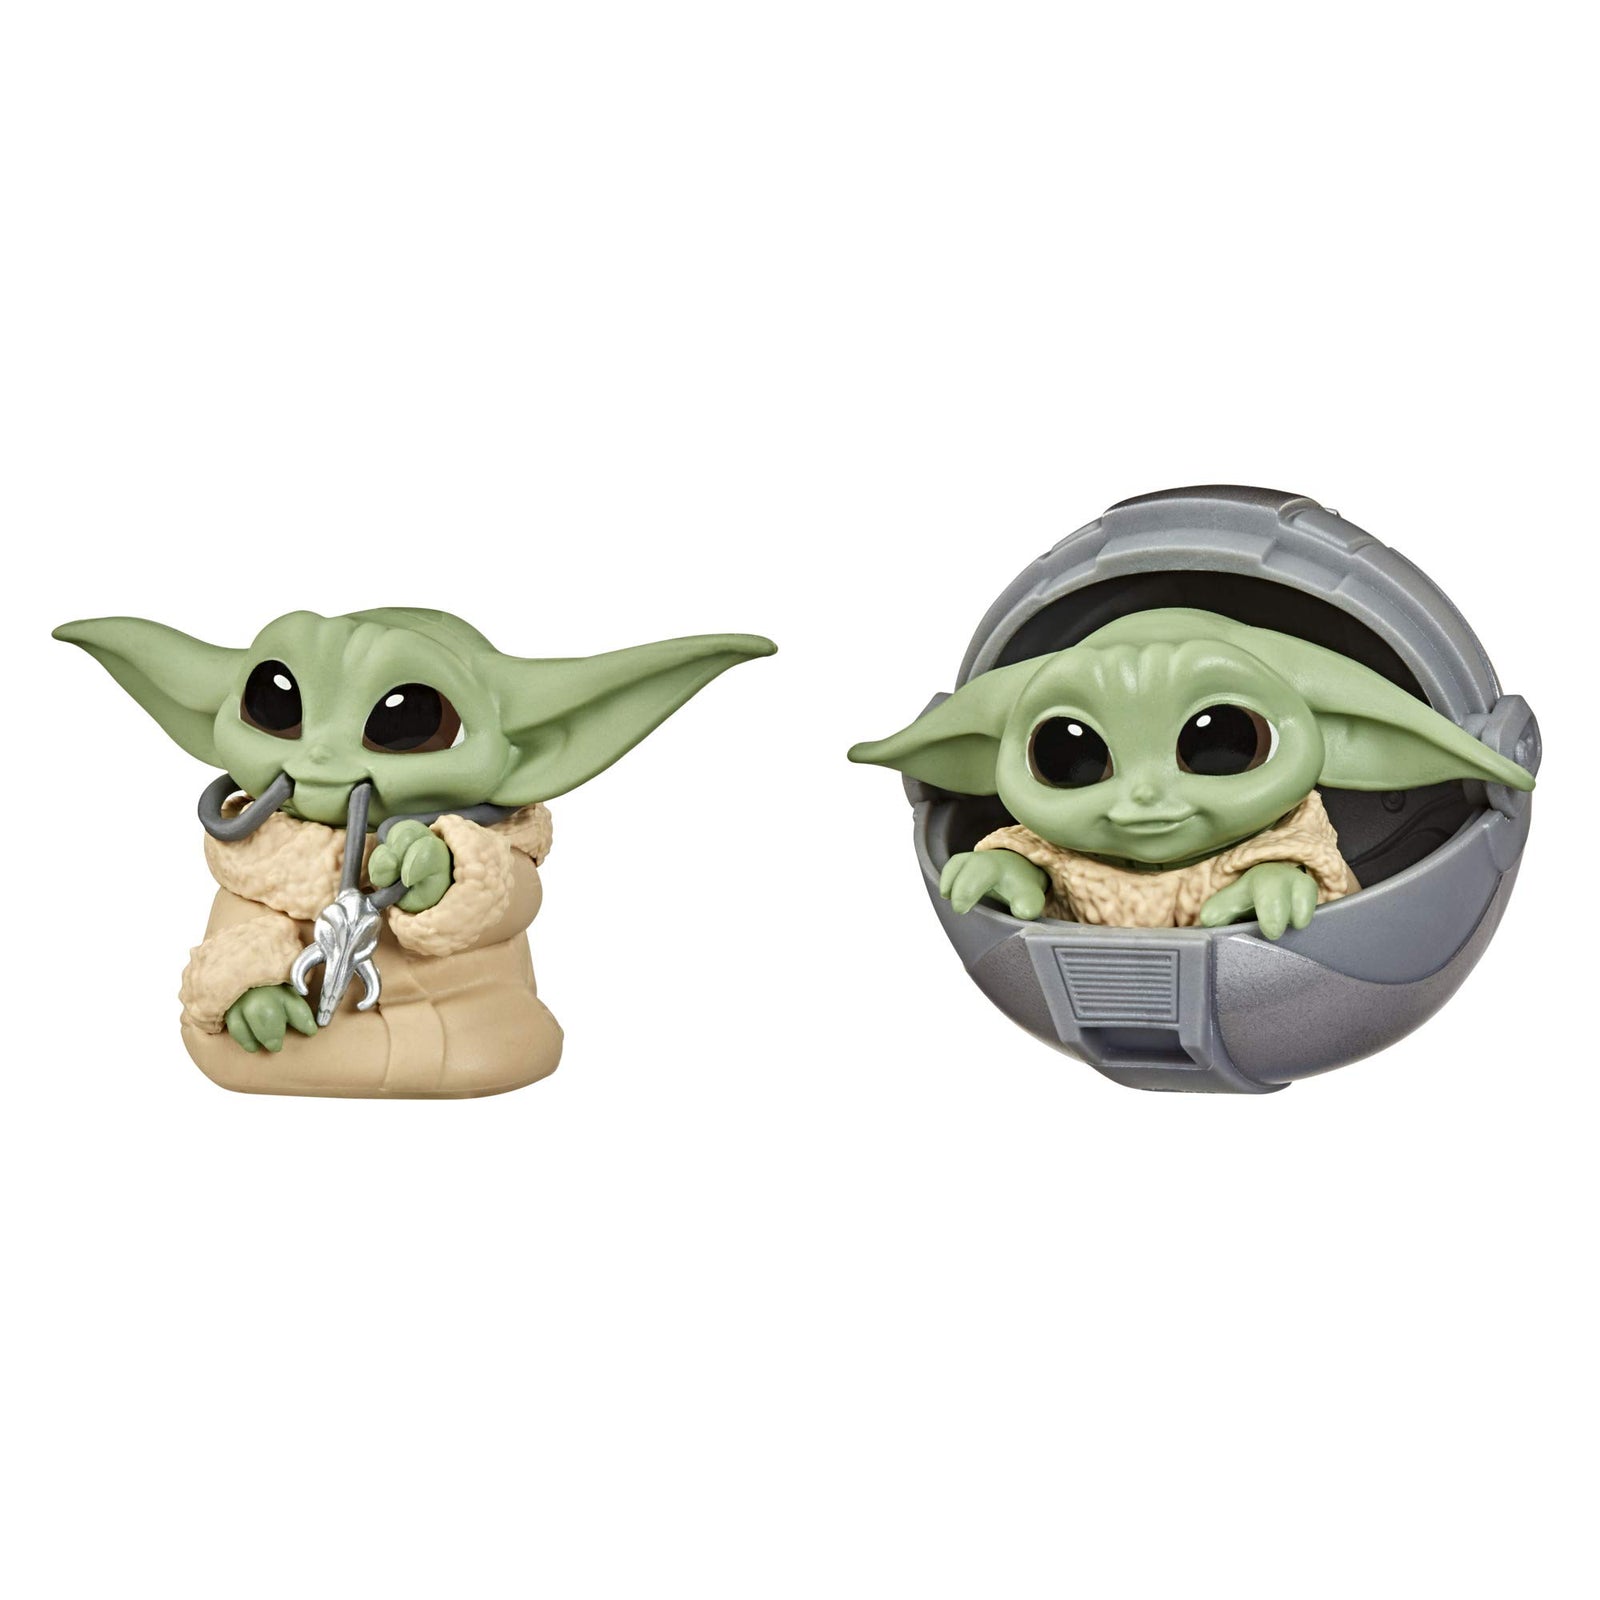 Star Wars The Bounty Collection Series 2 The Child Collectible Toys 2.2-Inch Child Pram, Mandalorian Necklace Figure 2-Pack